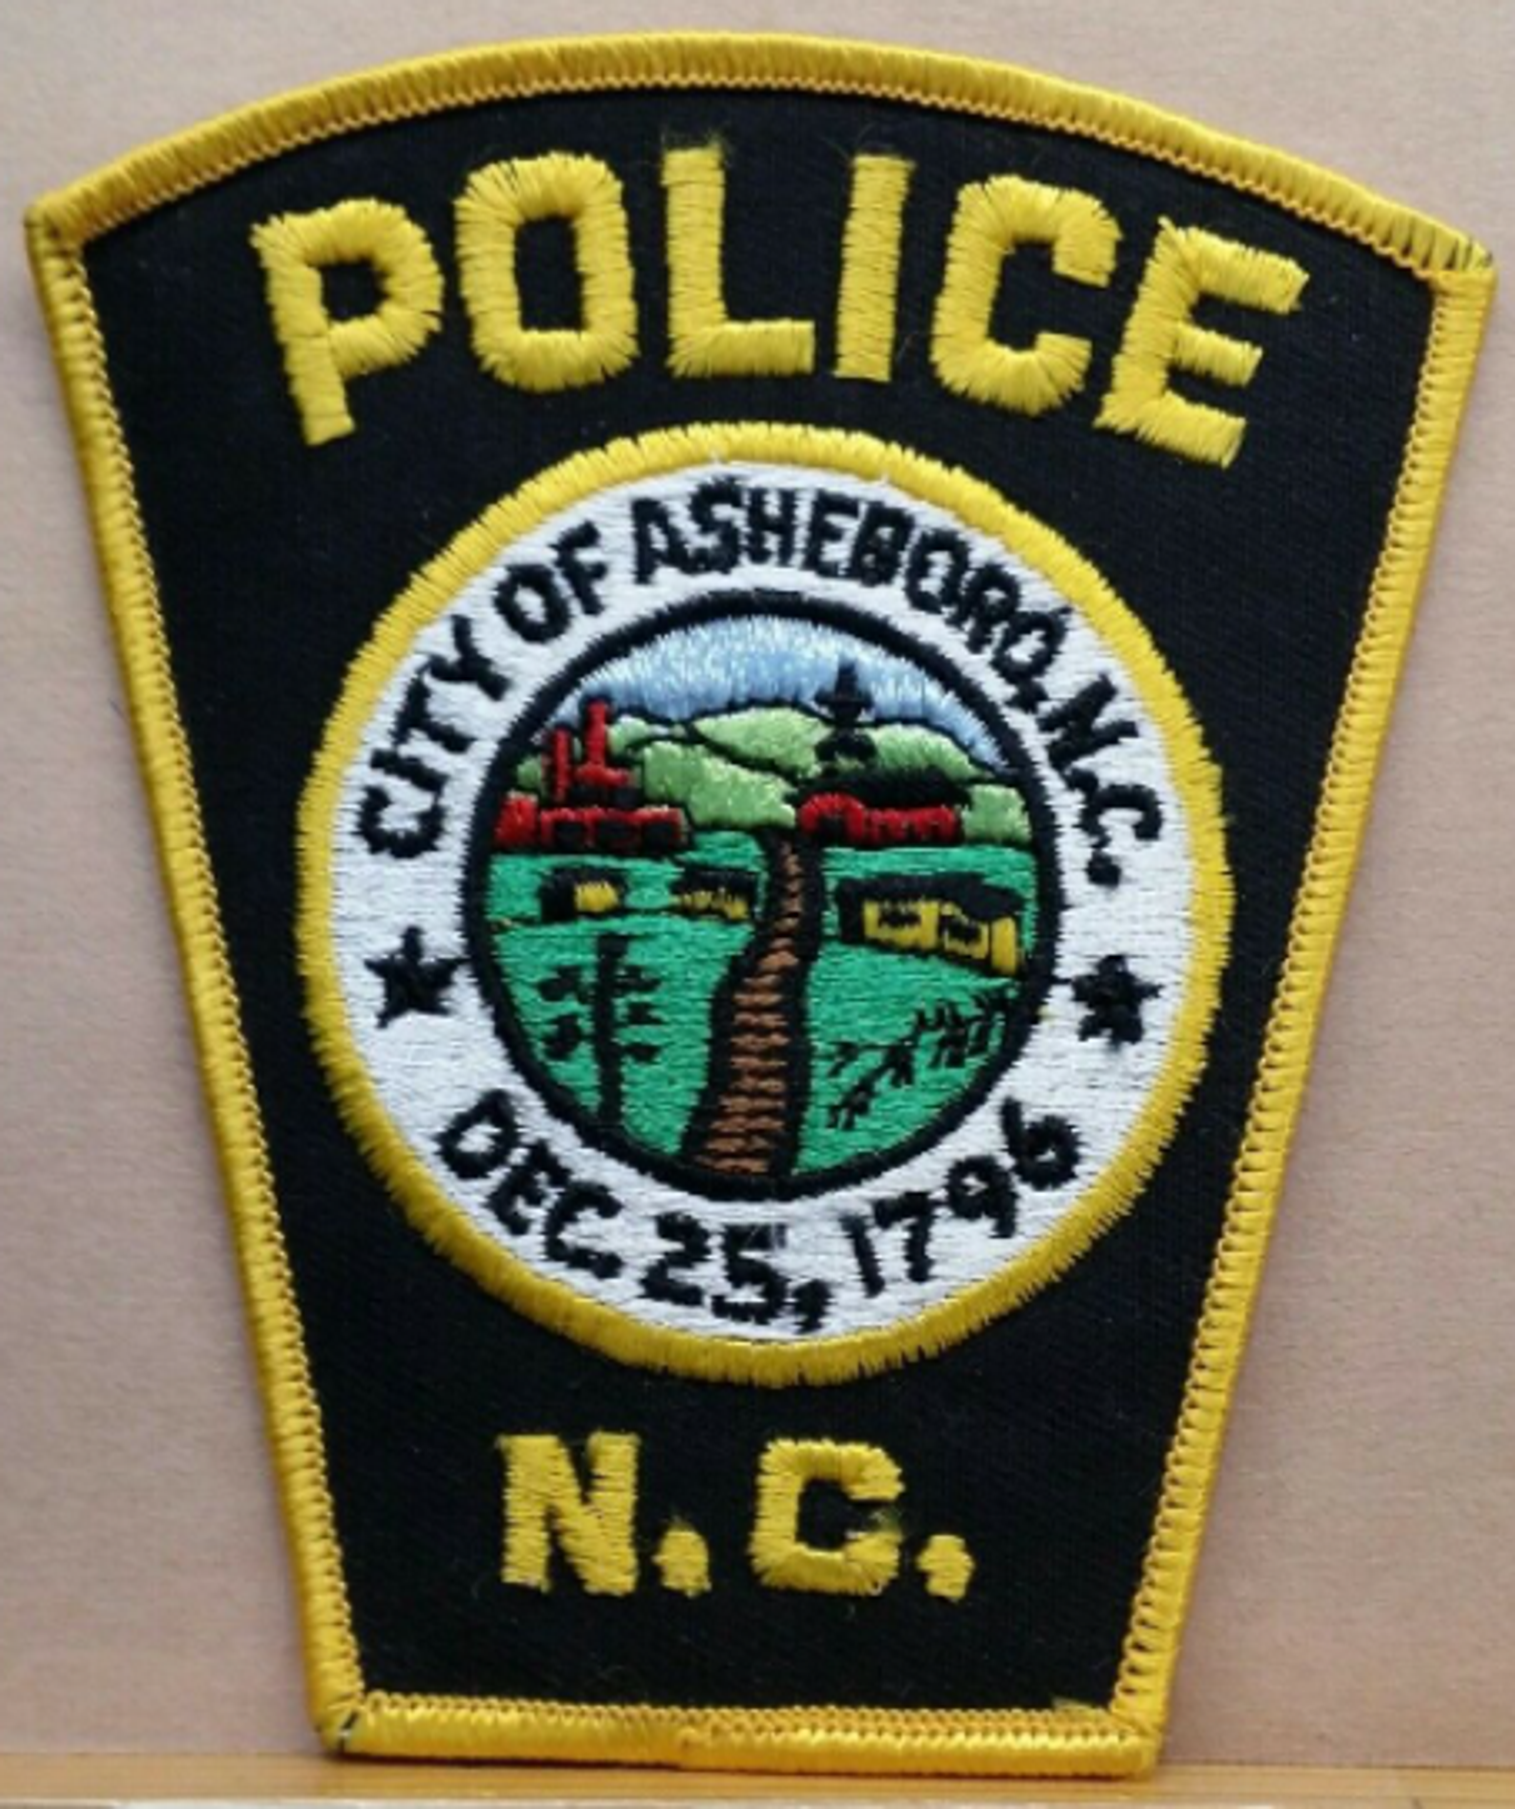 City of Asheboro NC Police Patch